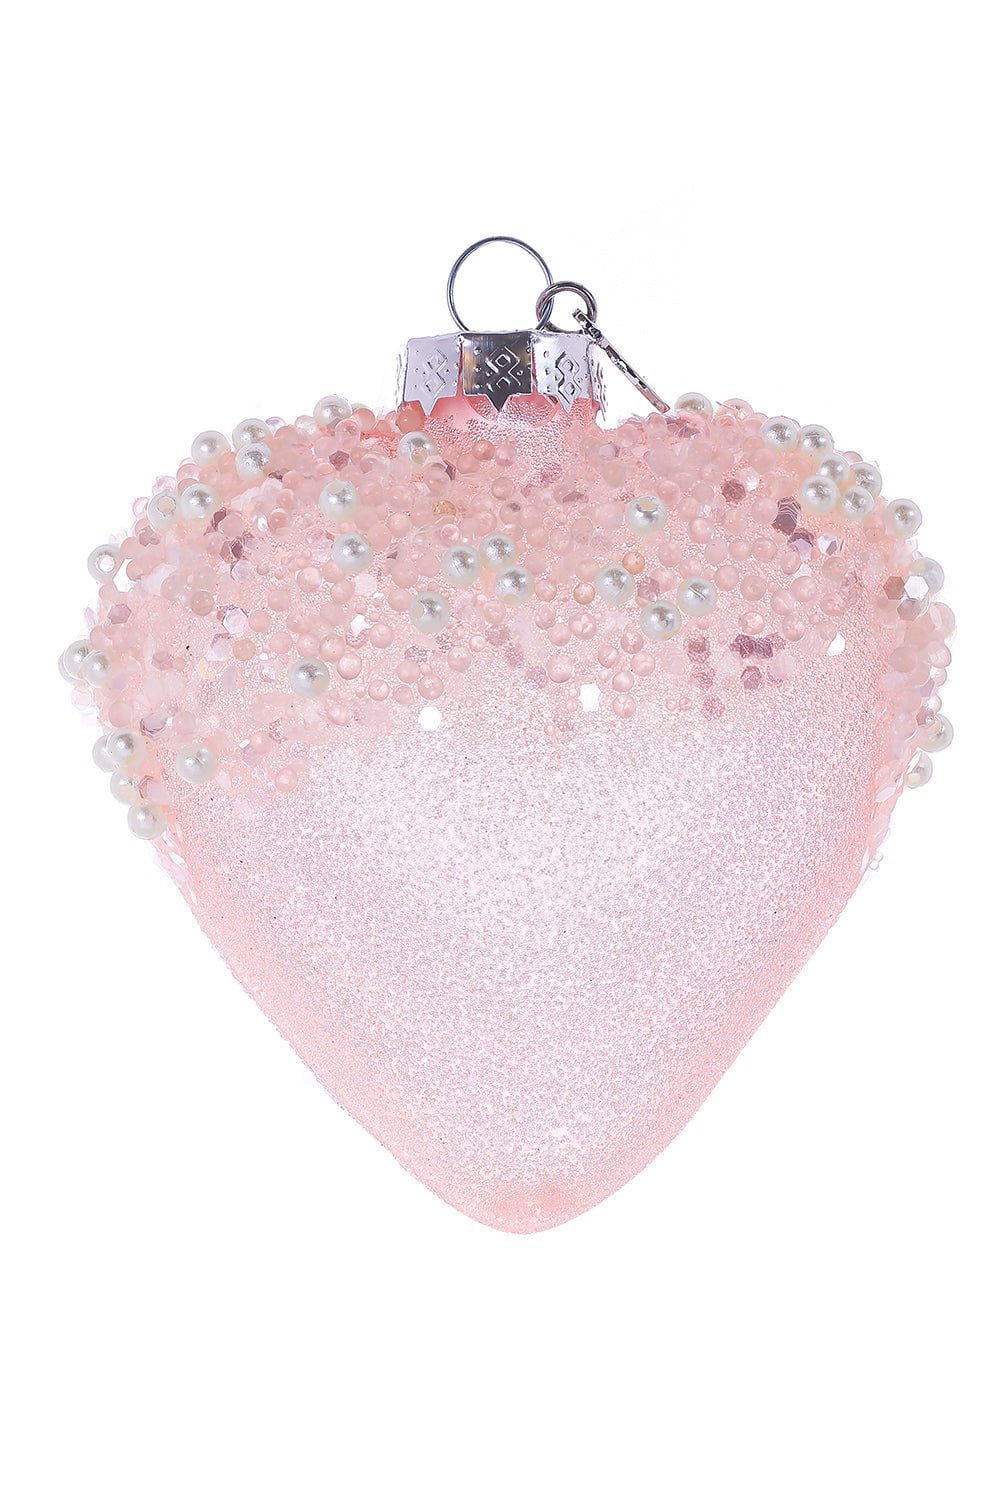 SELFLESS LOVE FOUNDATION-Pink Heart Ornament-PINK